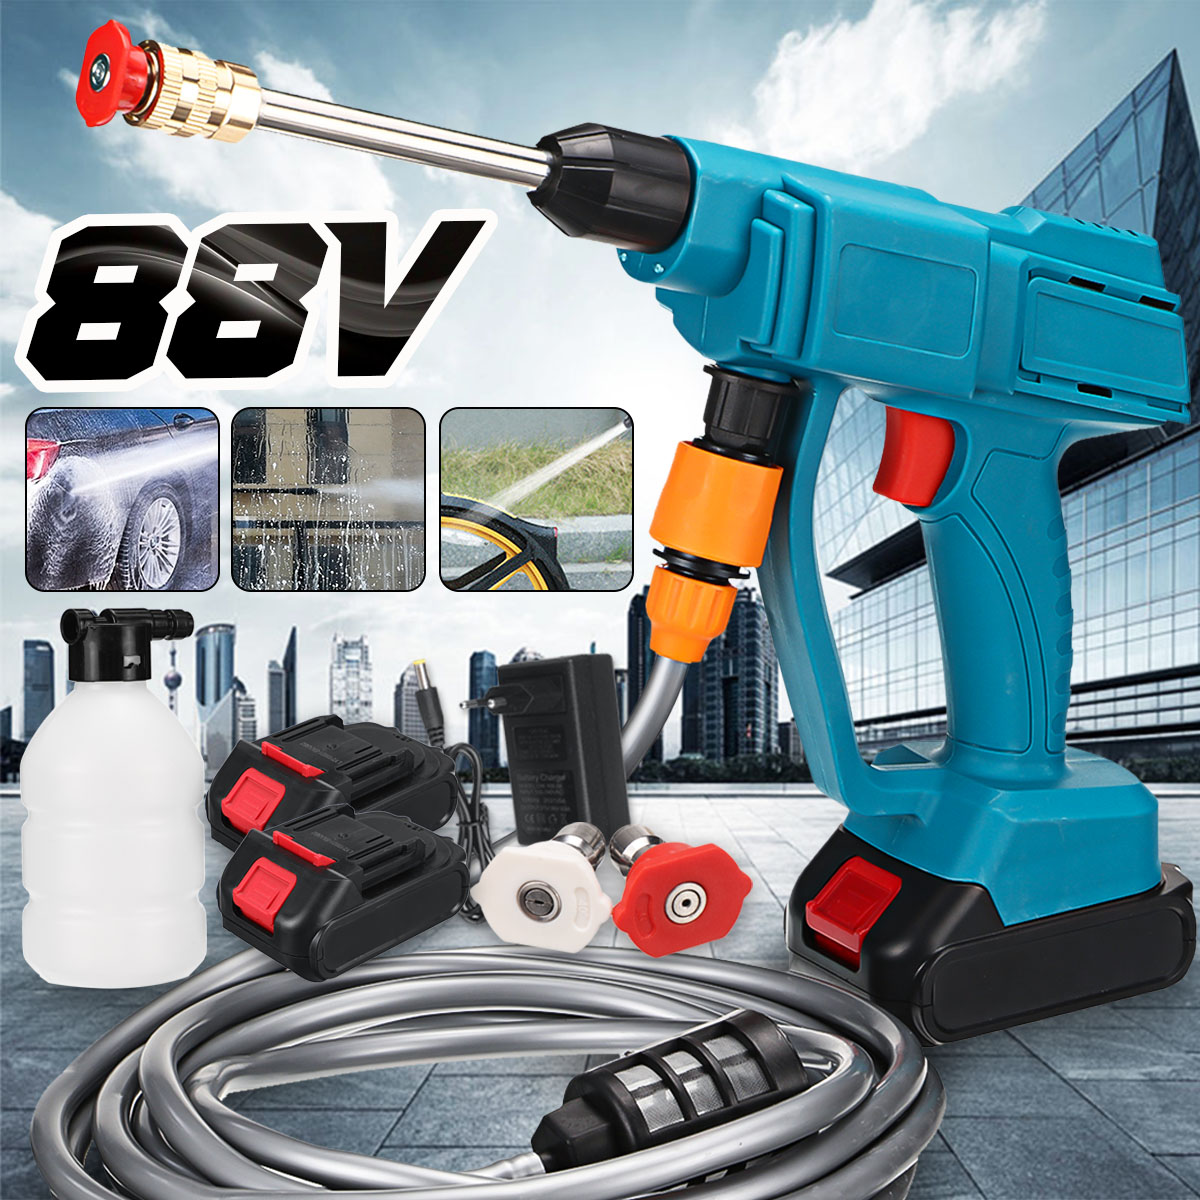 88VF-Cordless-High-Pressure-Washer-Car-Washing-Machine-Water-Cleaner-Spray-Guns-W-None12-Battery-For-1870219-2